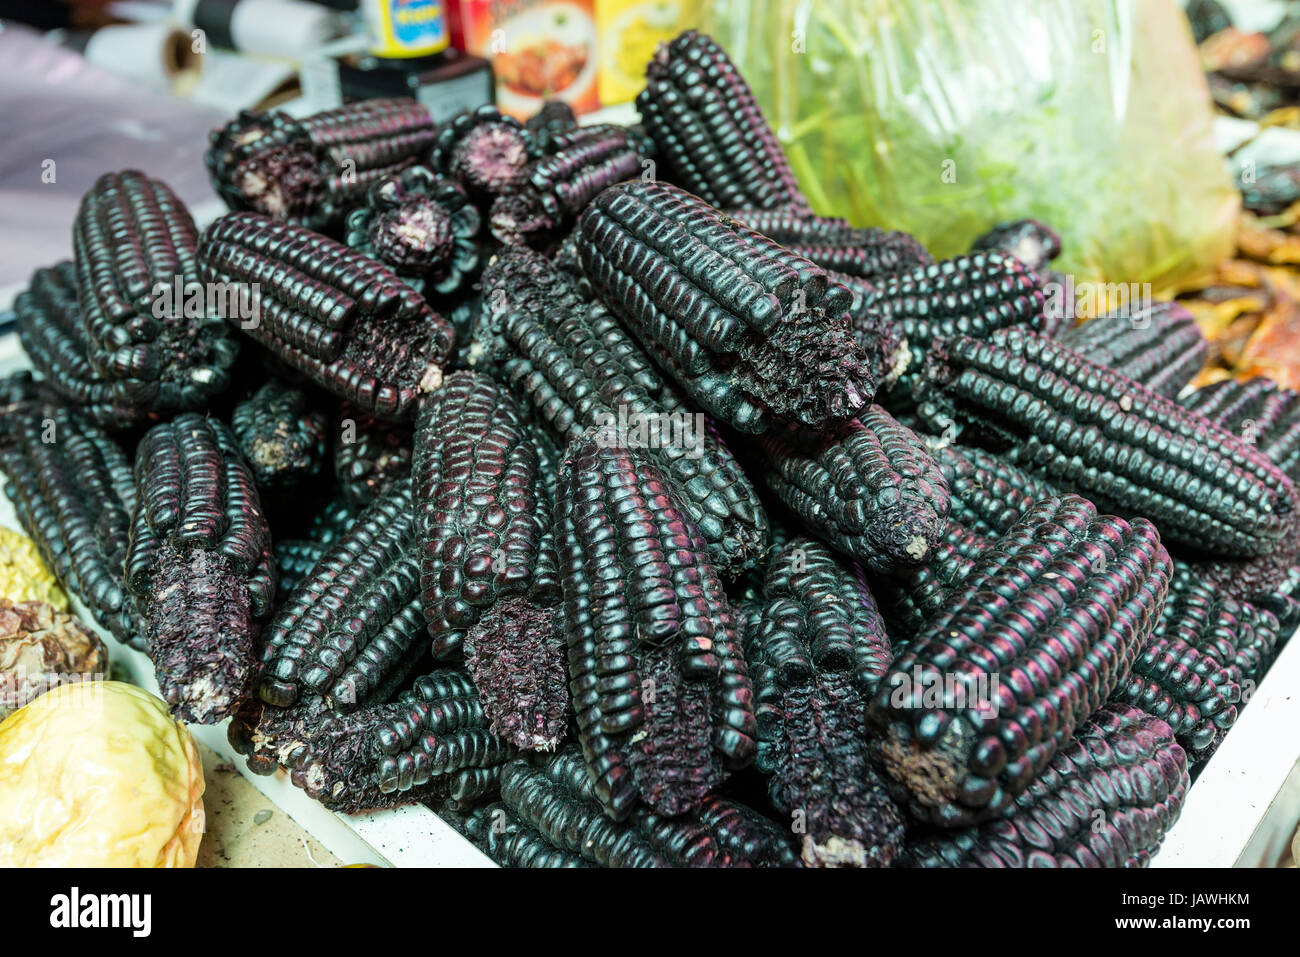 Black Aztec Sweet Corn for sale in a vegetable market. Stock Photo